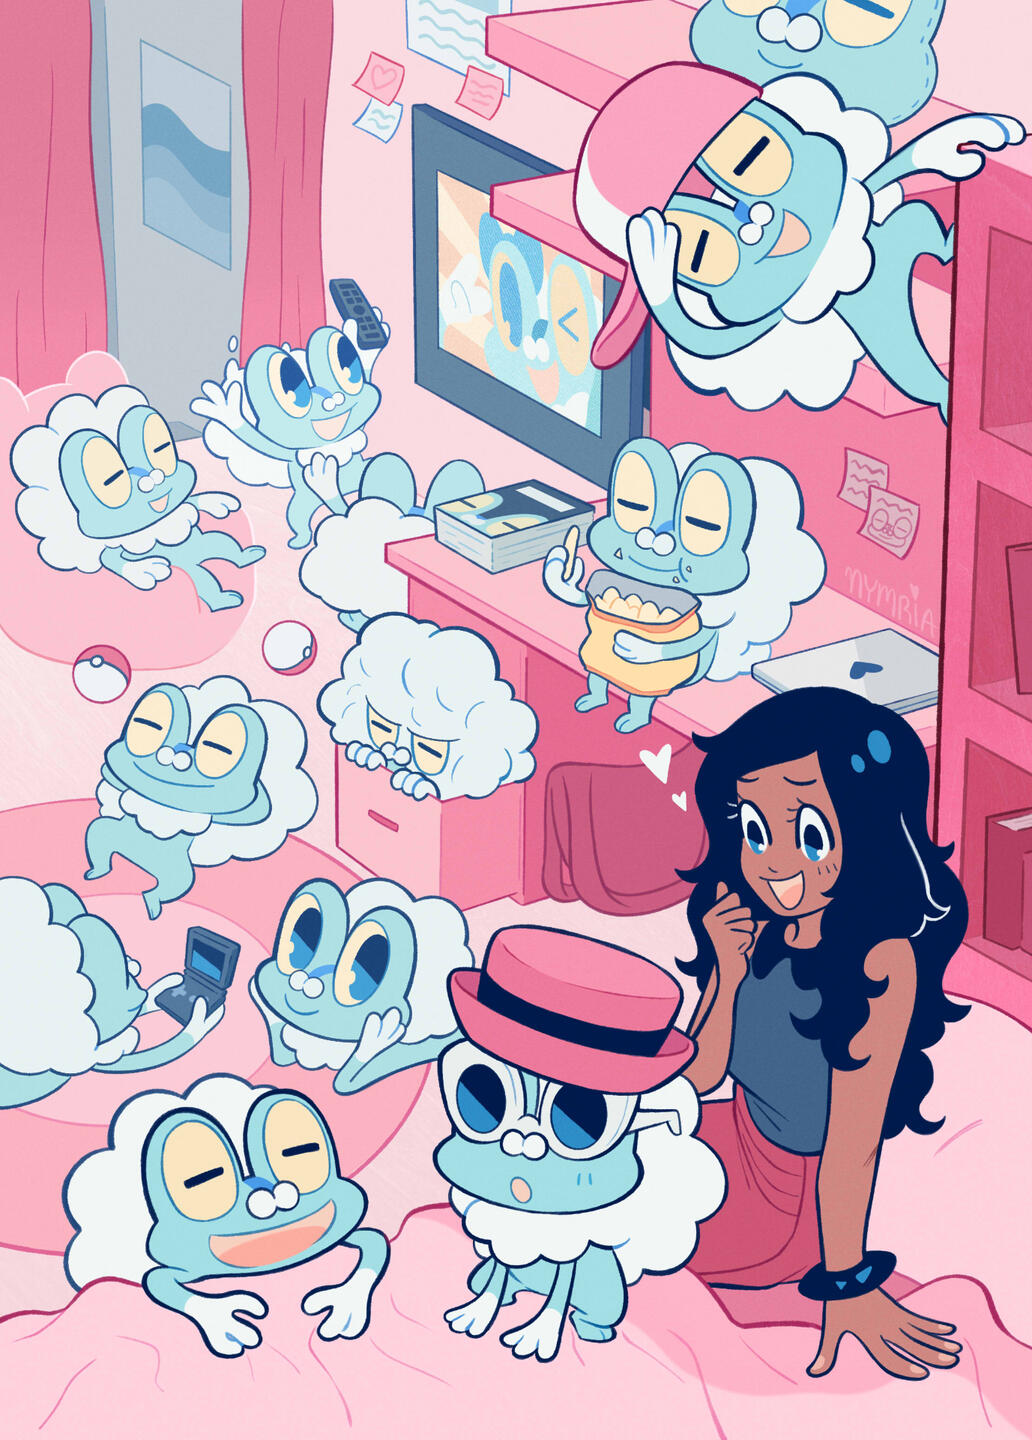 The Froakie Room by nymria